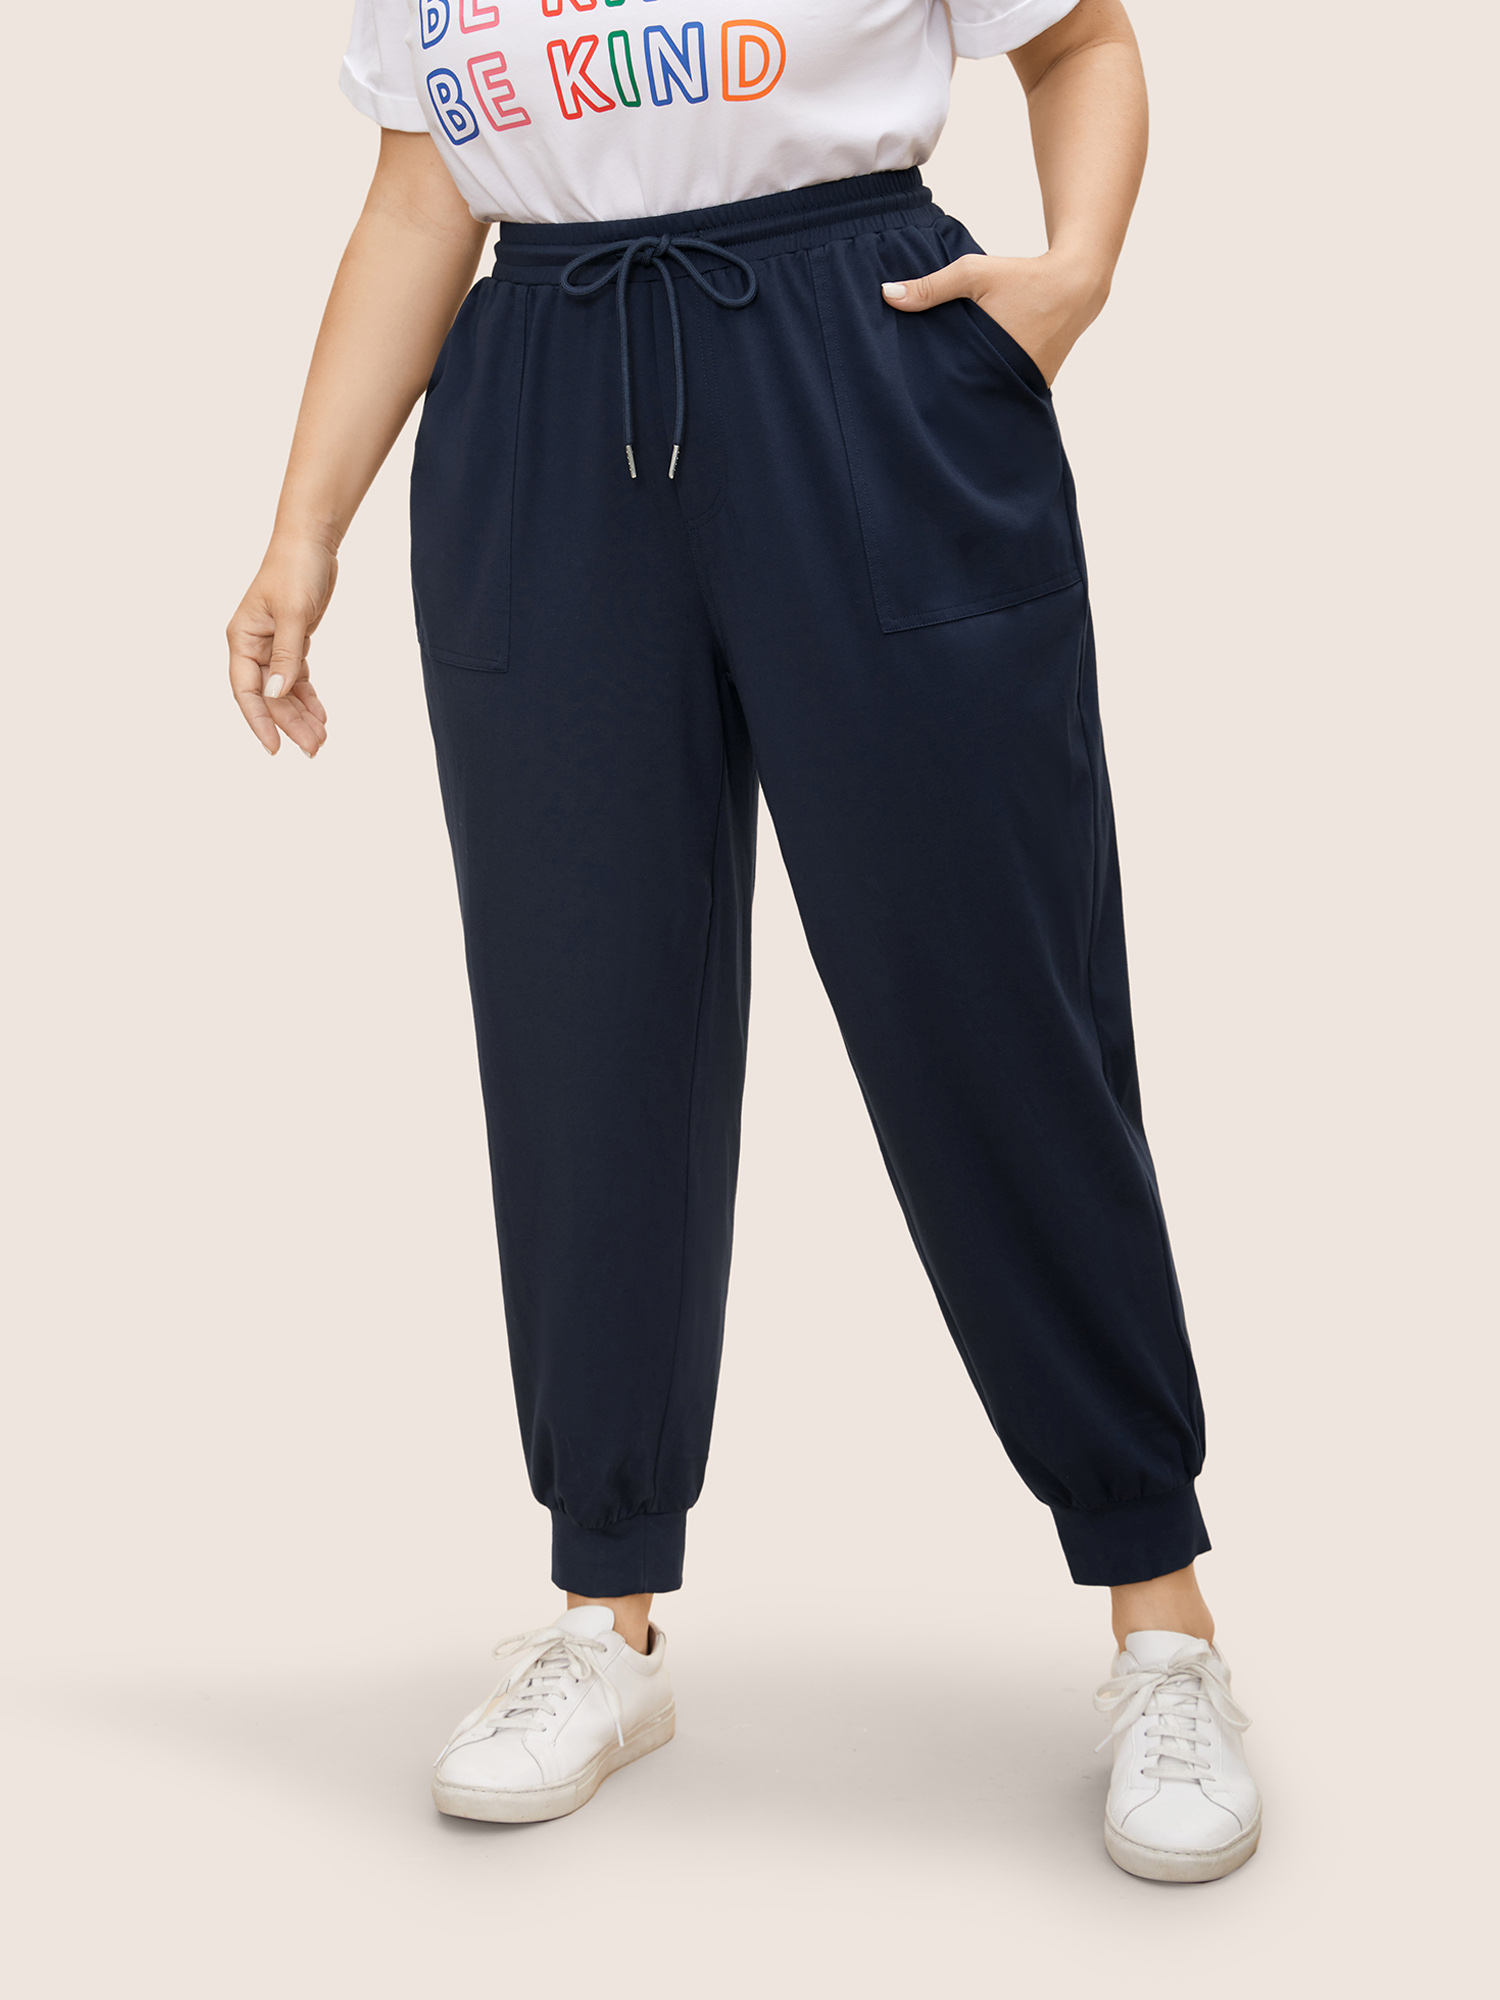 

Plus Size Knitted Stretchy Drawstring Jogger Pants Women Indigo Casual Mid Rise Everyday Pants BloomChic